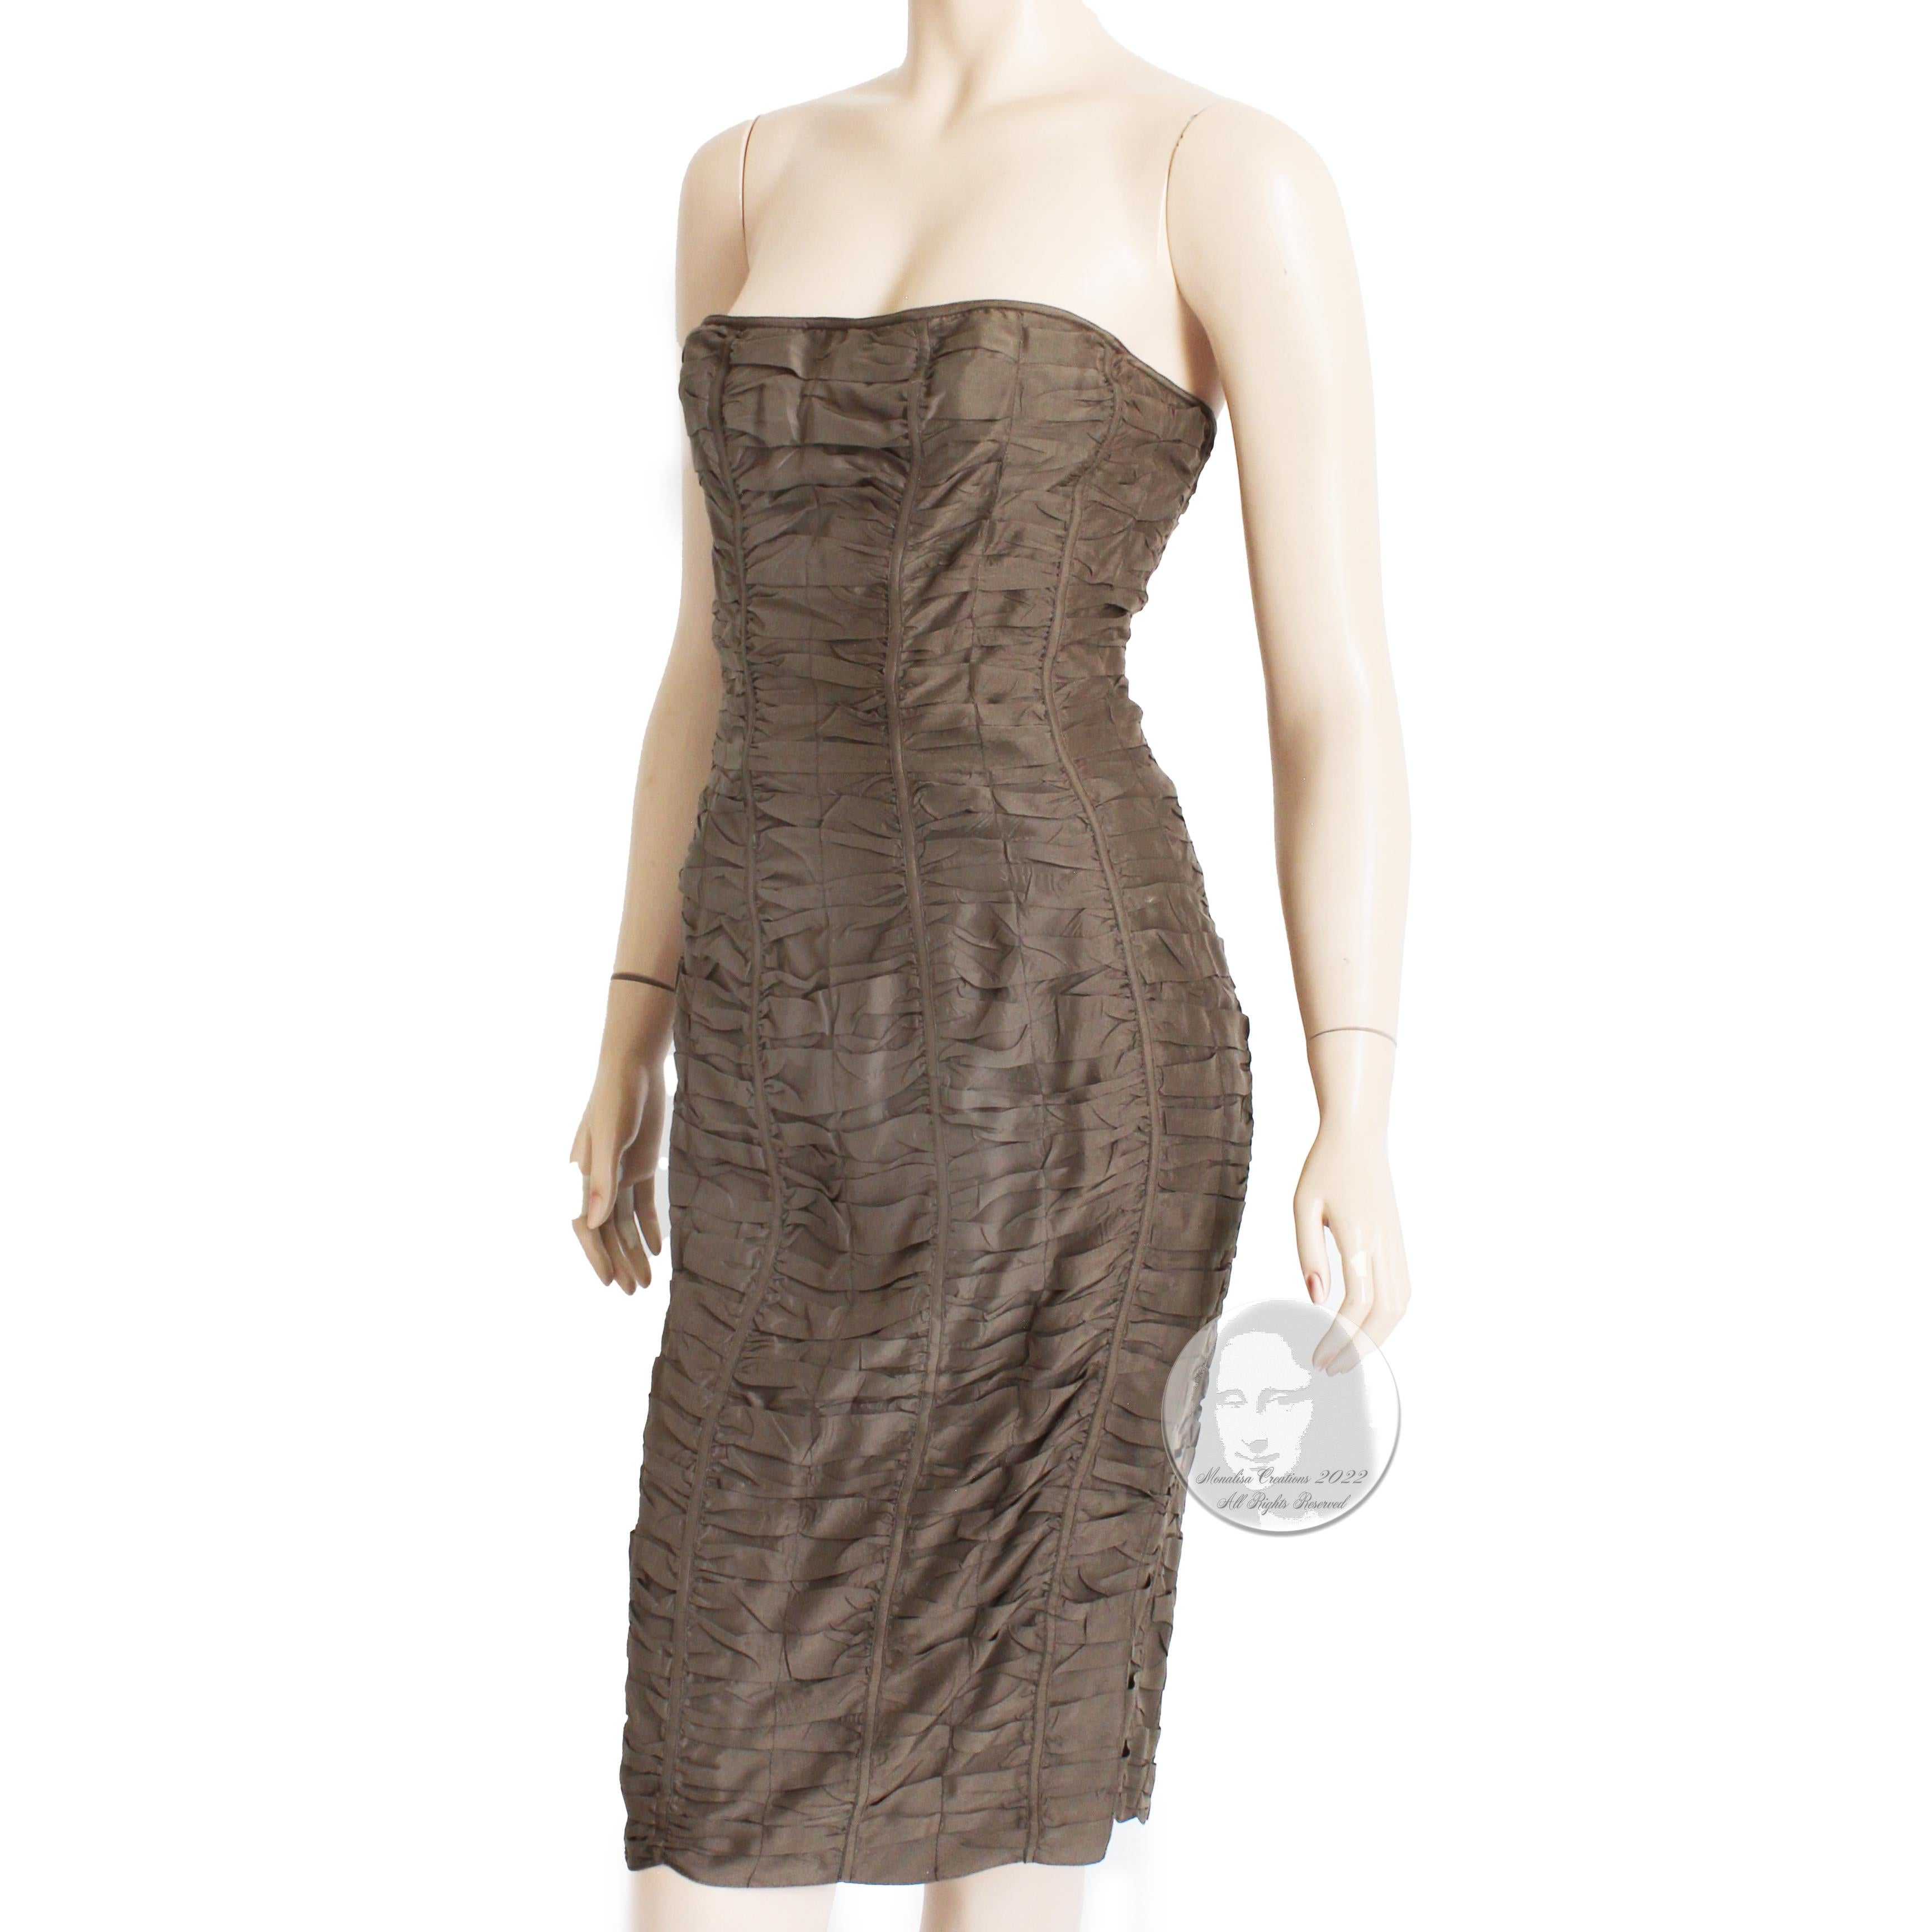 Gucci Dress Corset Bustier Bodice Bodycon Ruched Brown Silk Spring 2001 42 5